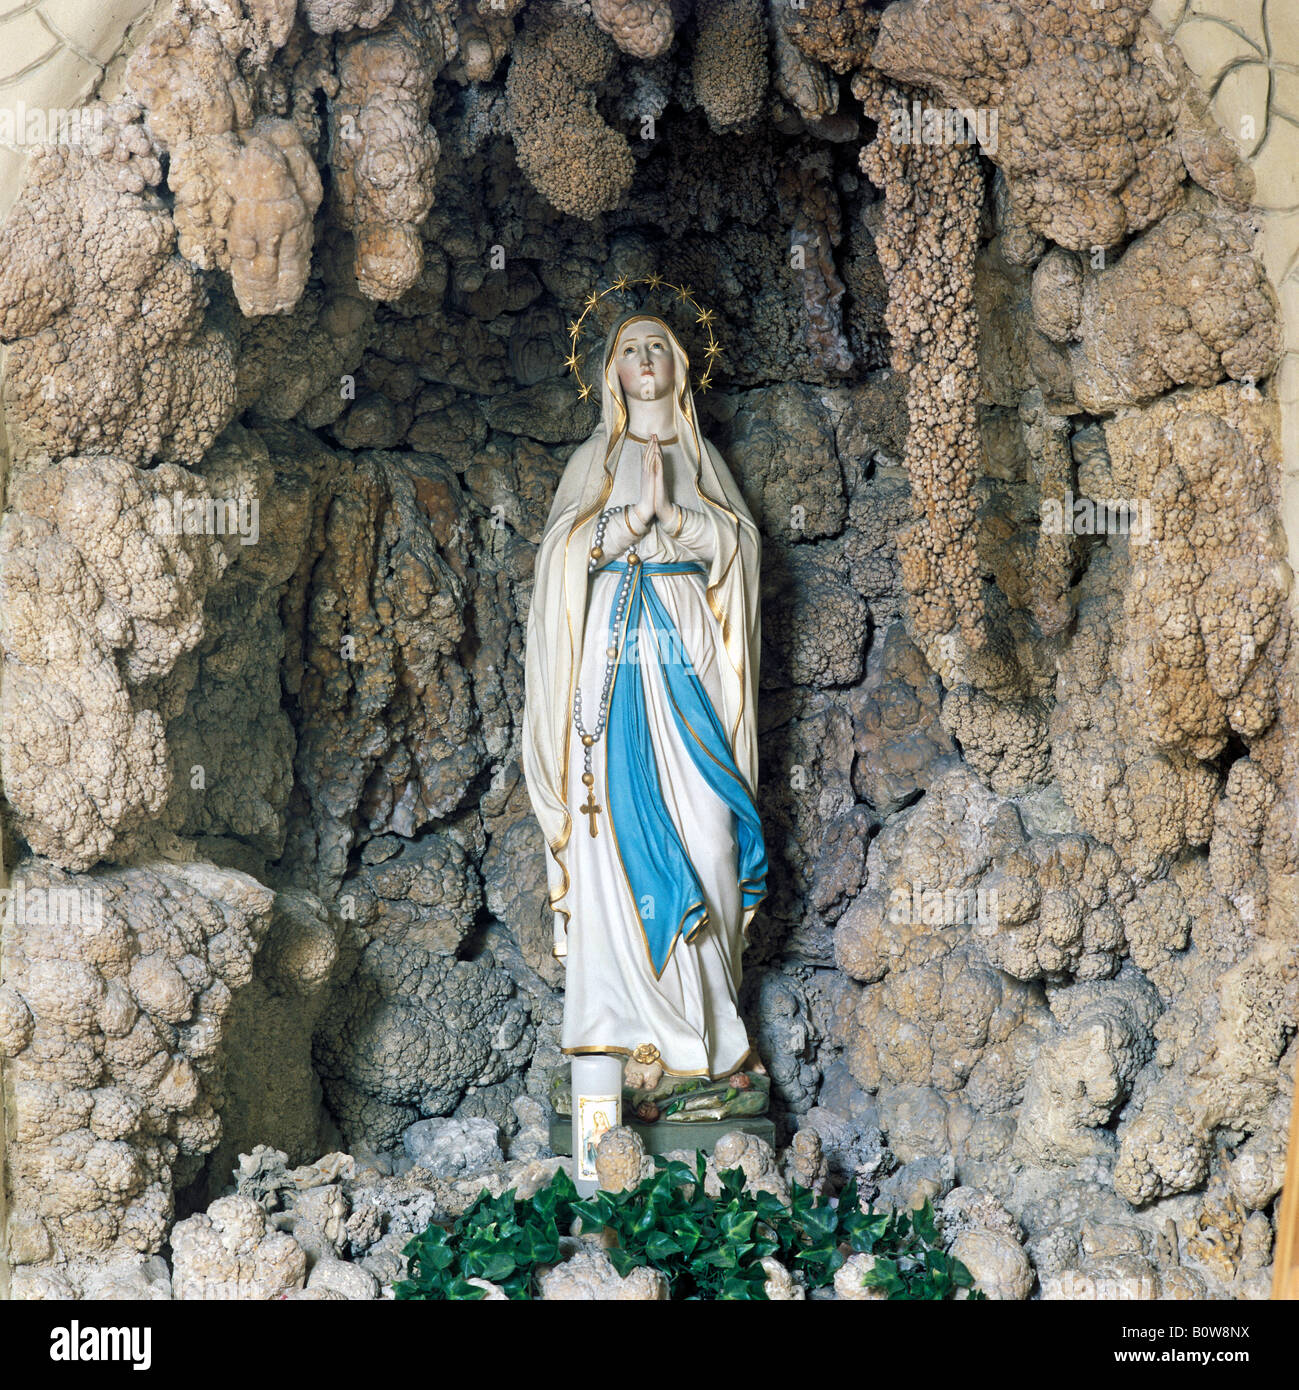 OUR LADY OF LOURDES 130mm STATUE CANDLES CRUCIFIXES & PICTURES ALSO LISTED 937 